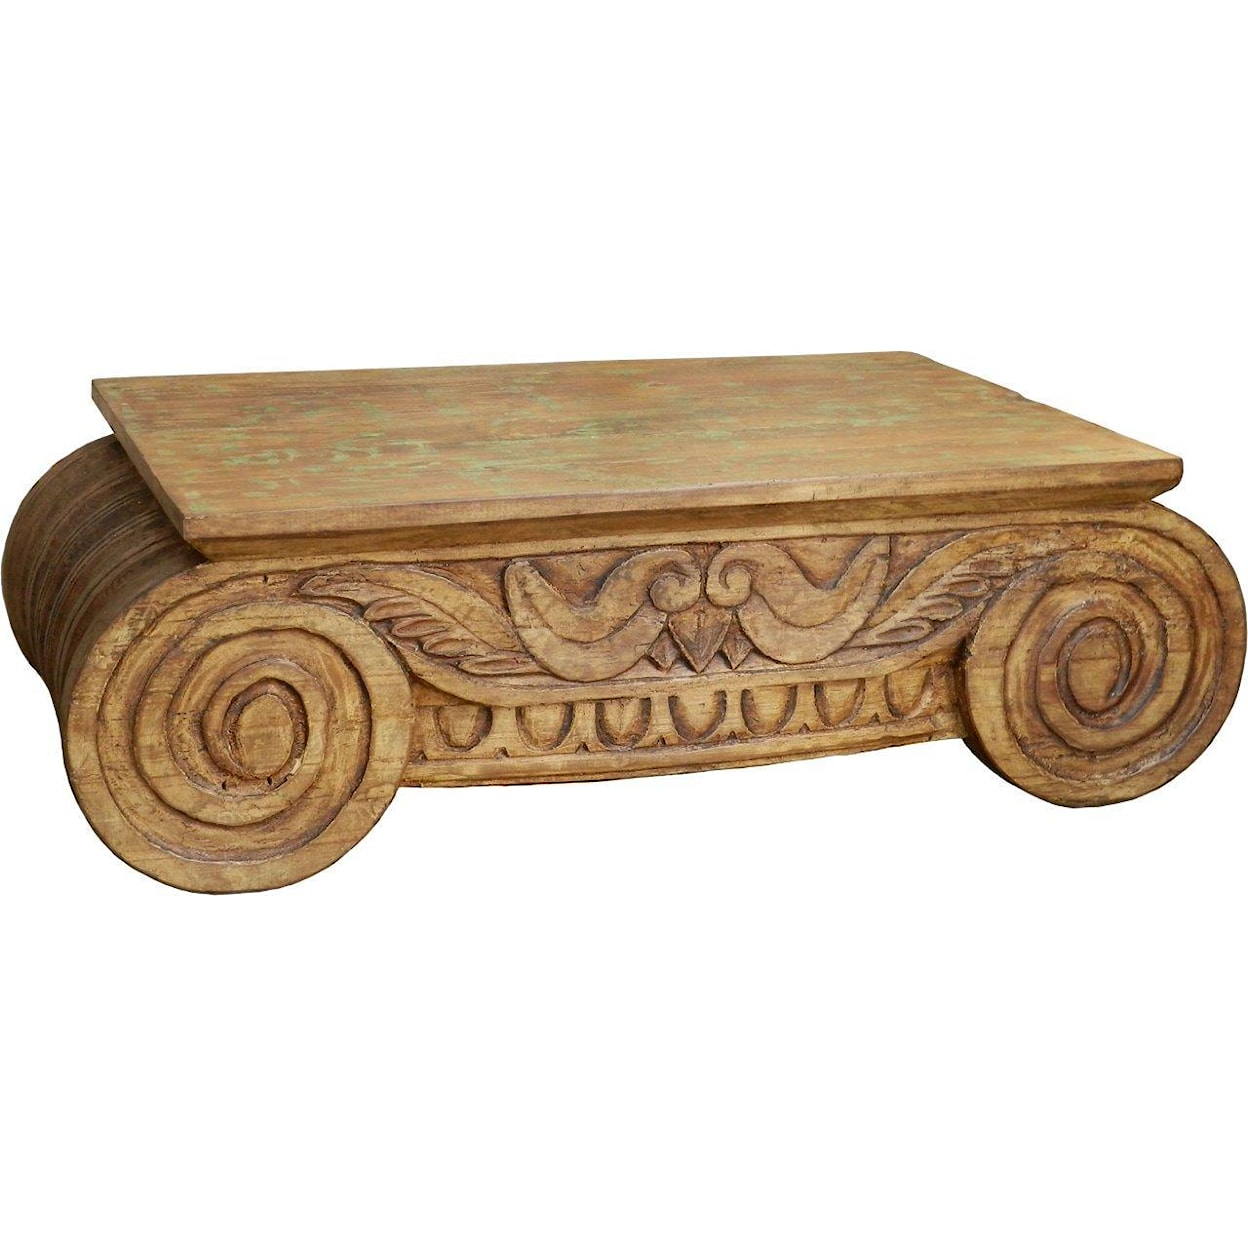 Furniture Source International Occasional Tables Charles Coffee Table